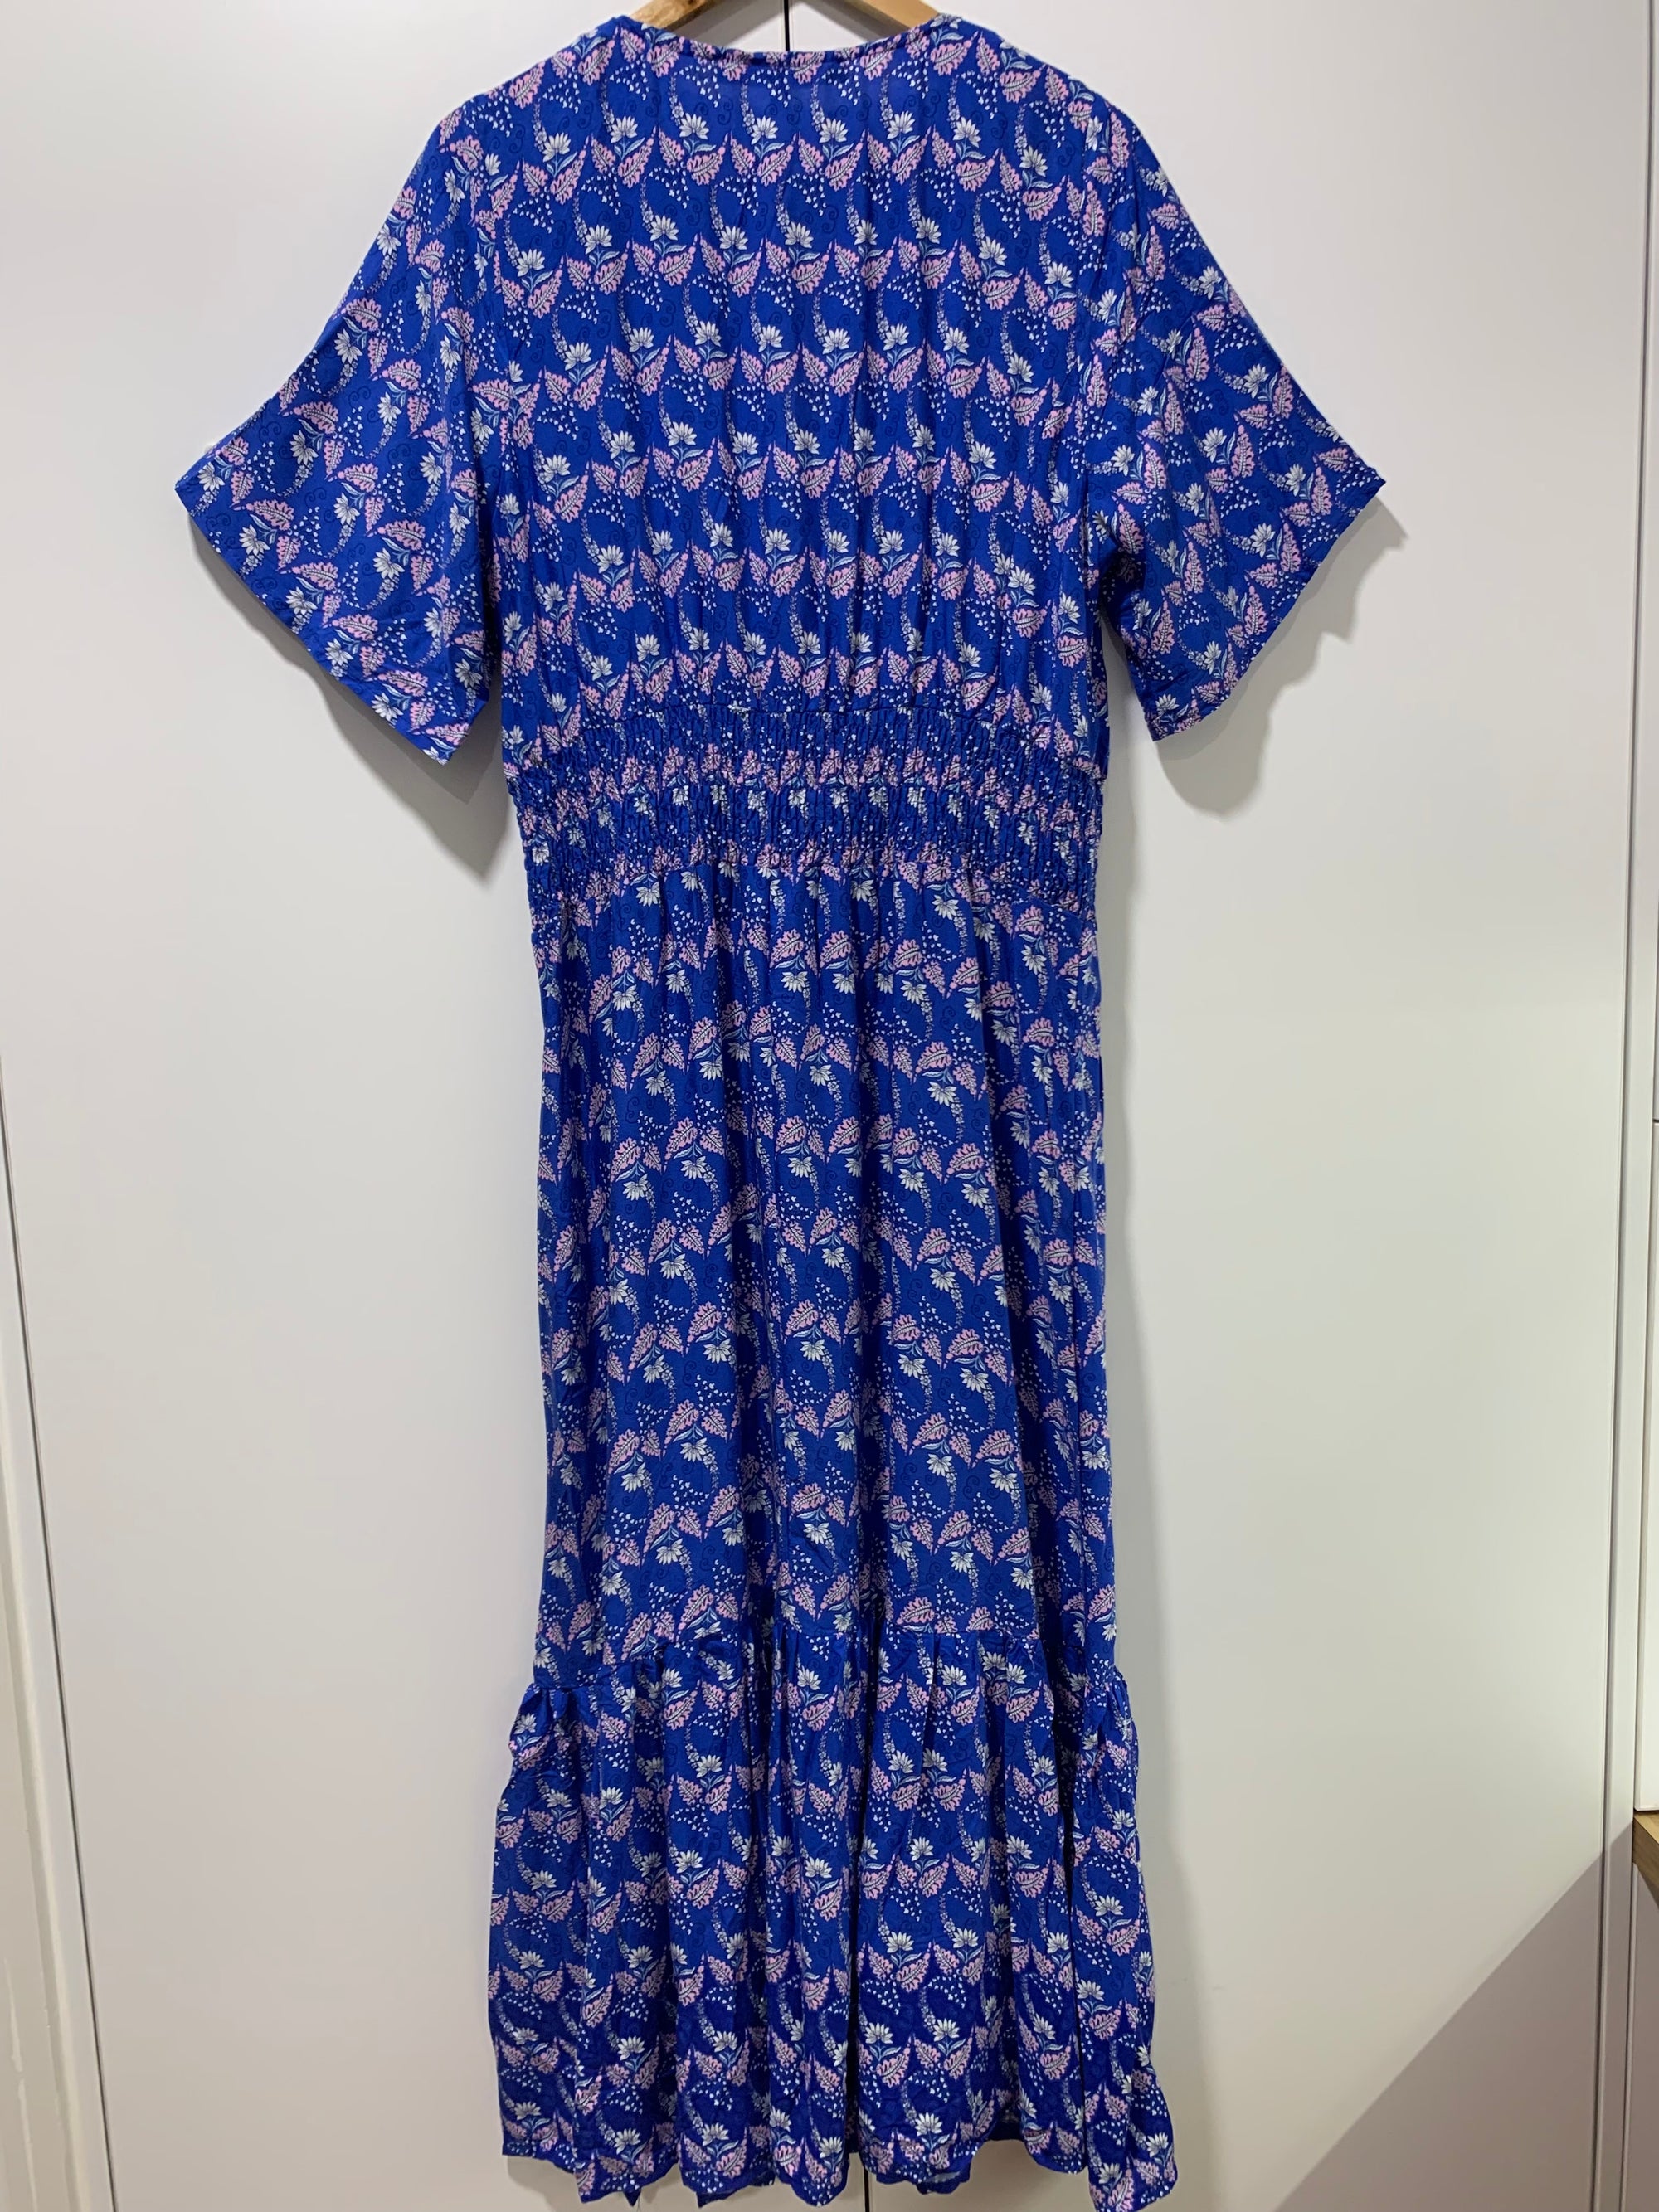 Cross Over Effortless Electric Blue Dress w Floral Print with Elastic Waist